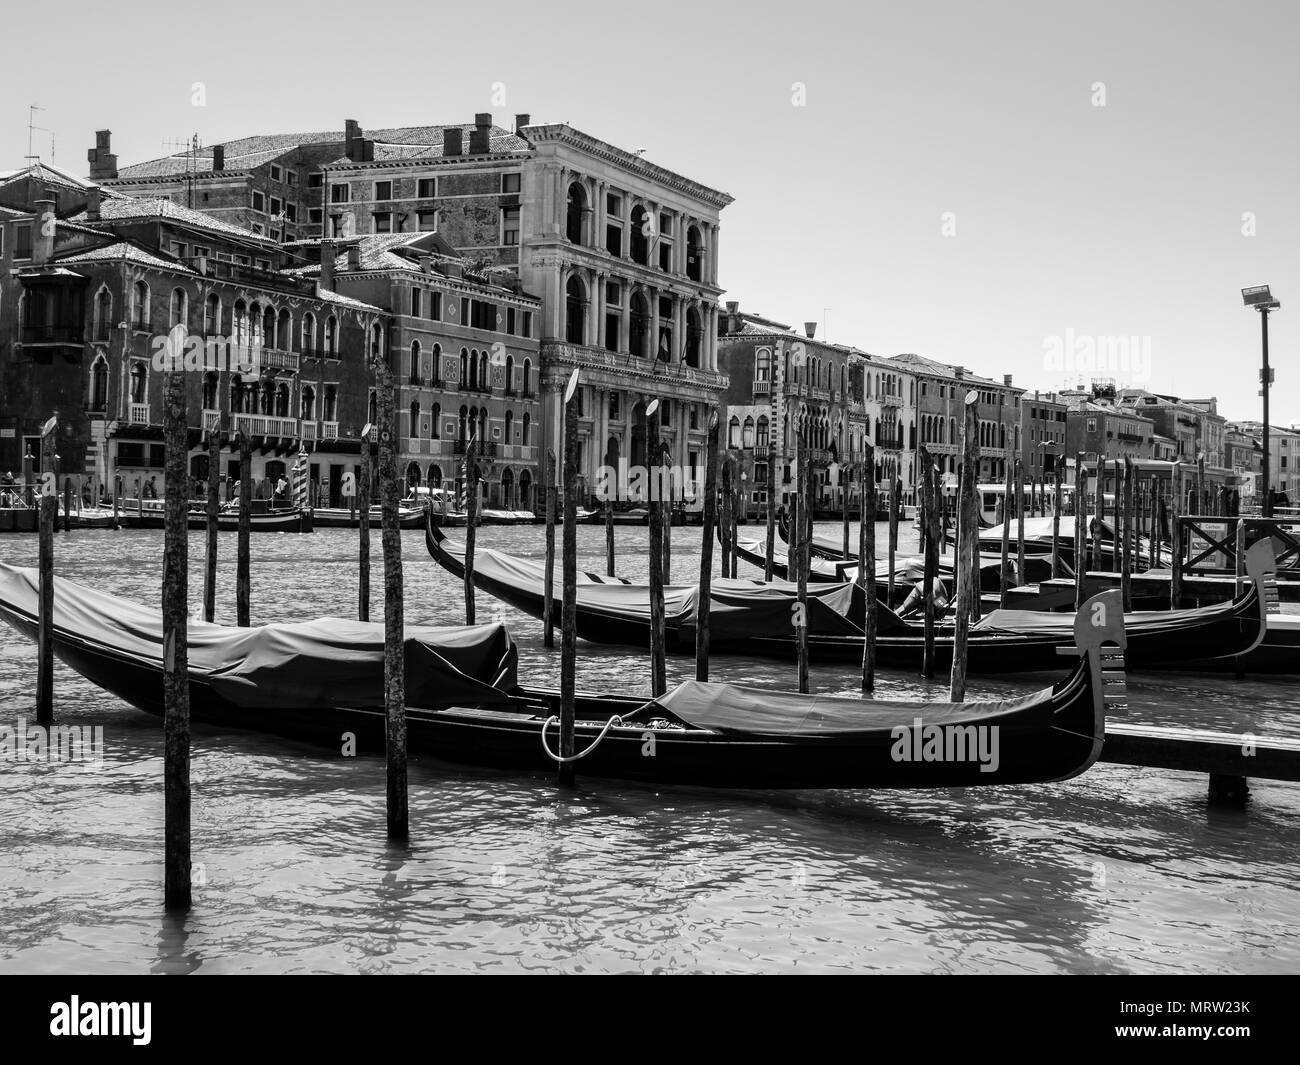 Gondola boats anchored in the ports of Grand Canal in the City of Canals - Venice, Italy Stock Photo